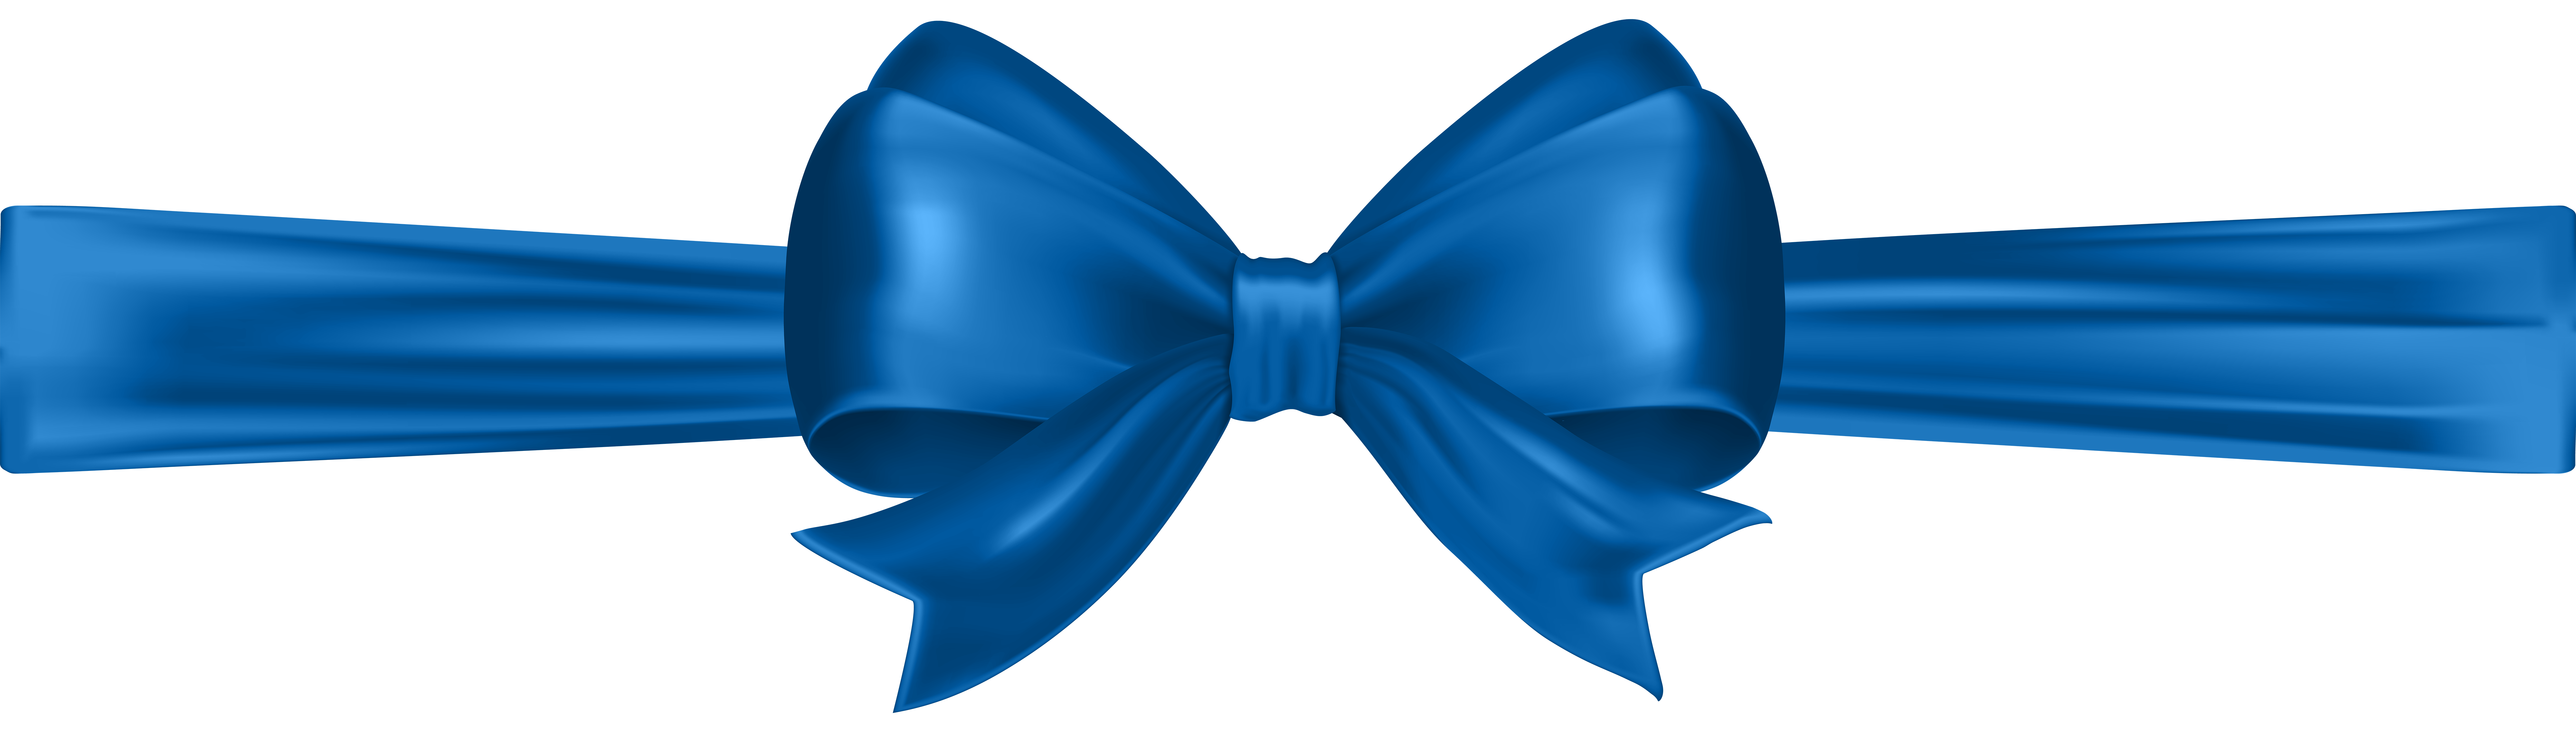 Blue Bow Deco PNG Clip Art Image | Gallery Yopriceville - High-Quality ...